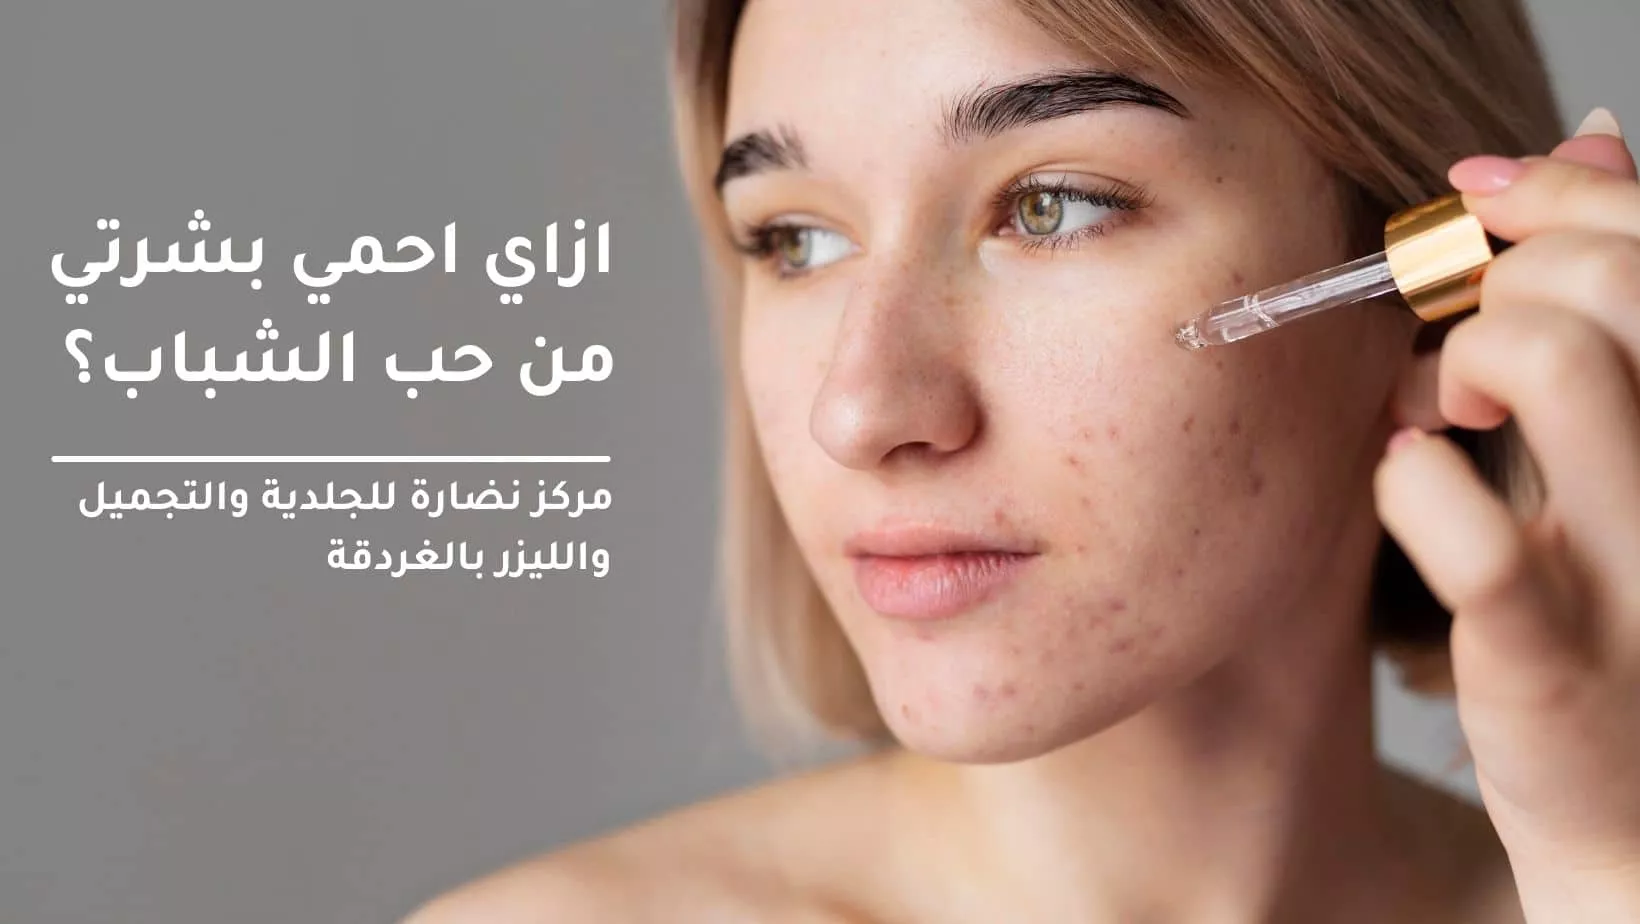 How do I protect my skin from acne?